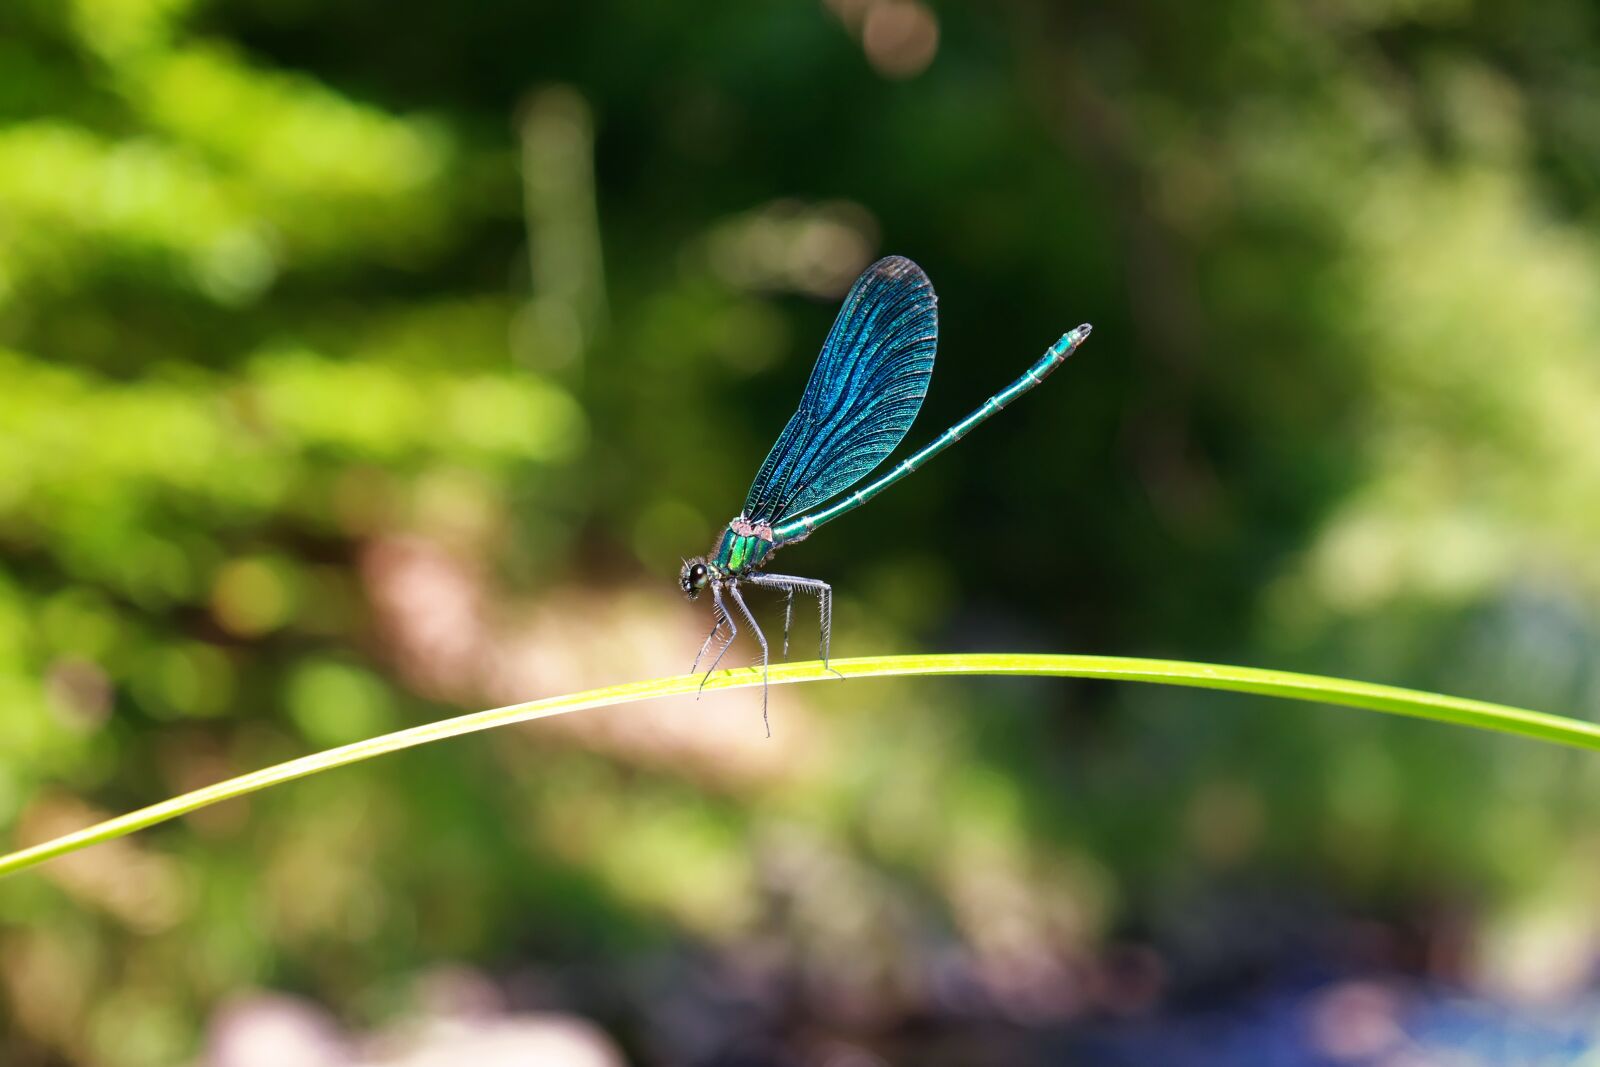 Samsung NX30 sample photo. Dragonfly, nature, insect photography